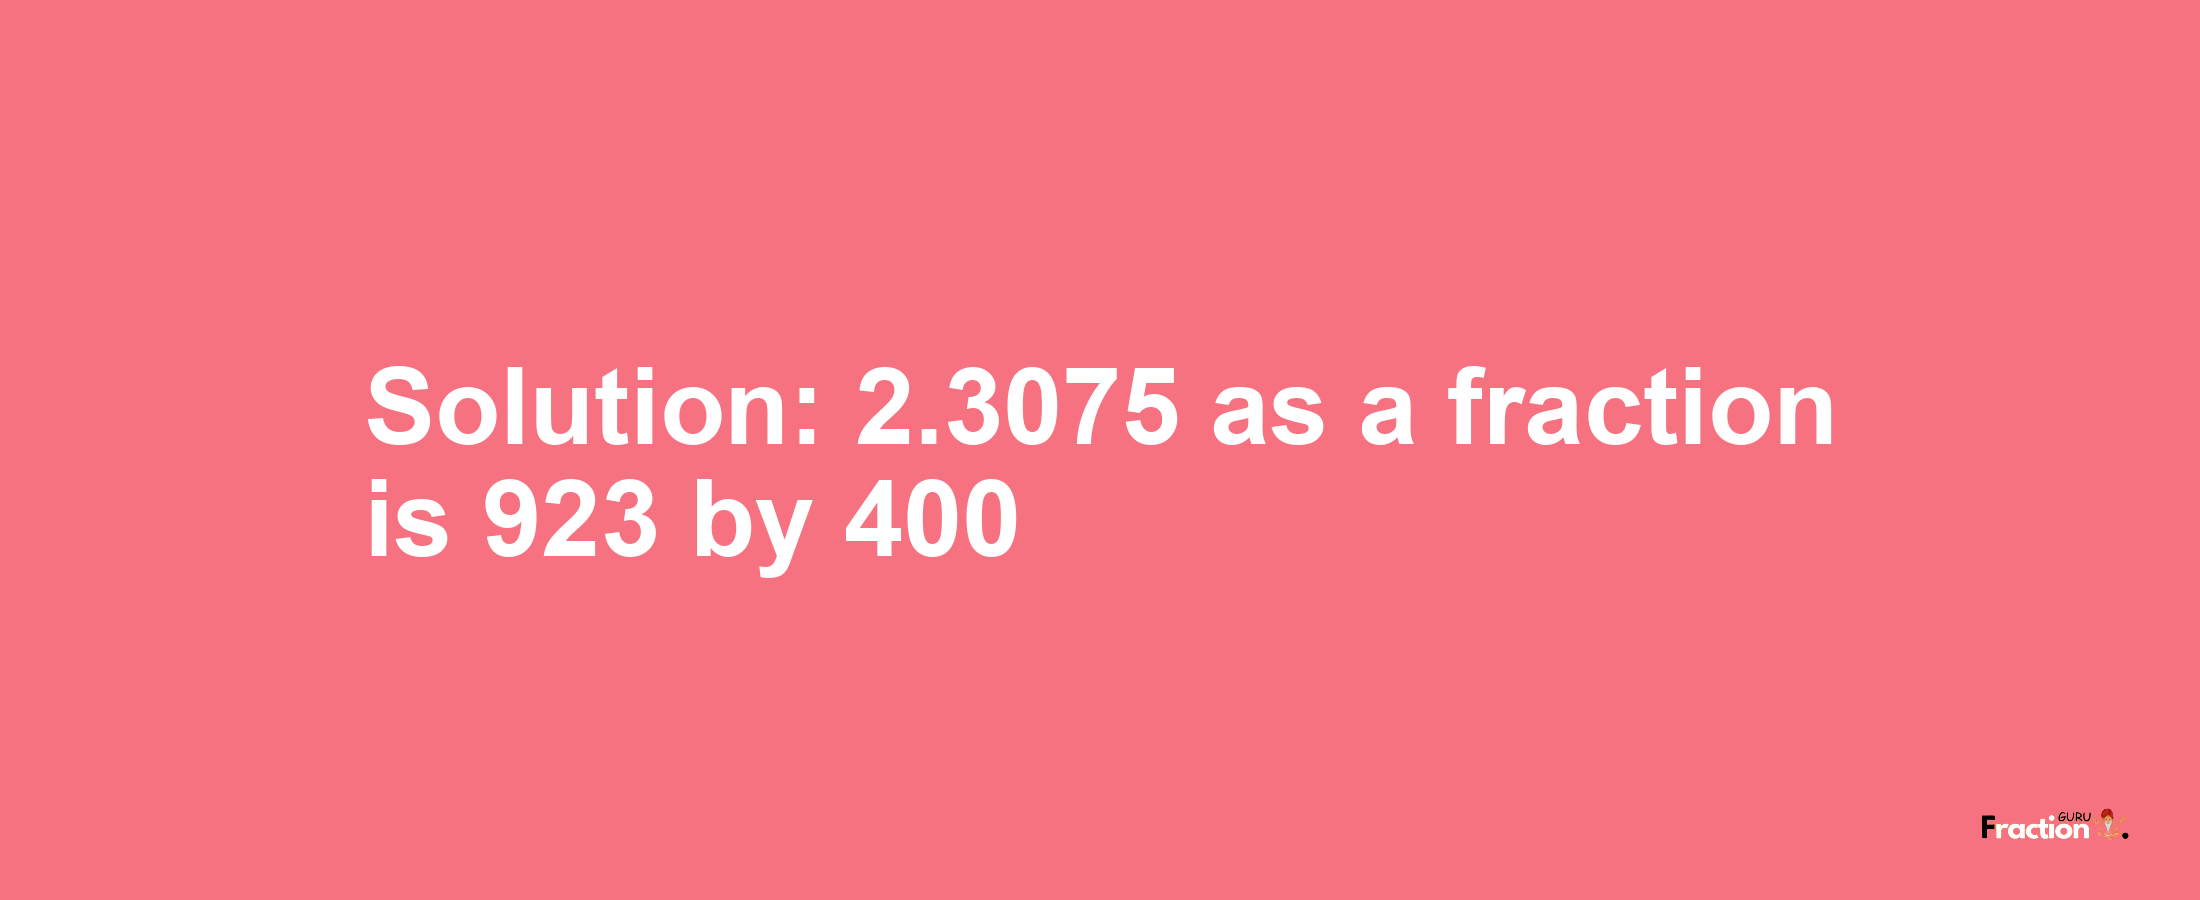 Solution:2.3075 as a fraction is 923/400